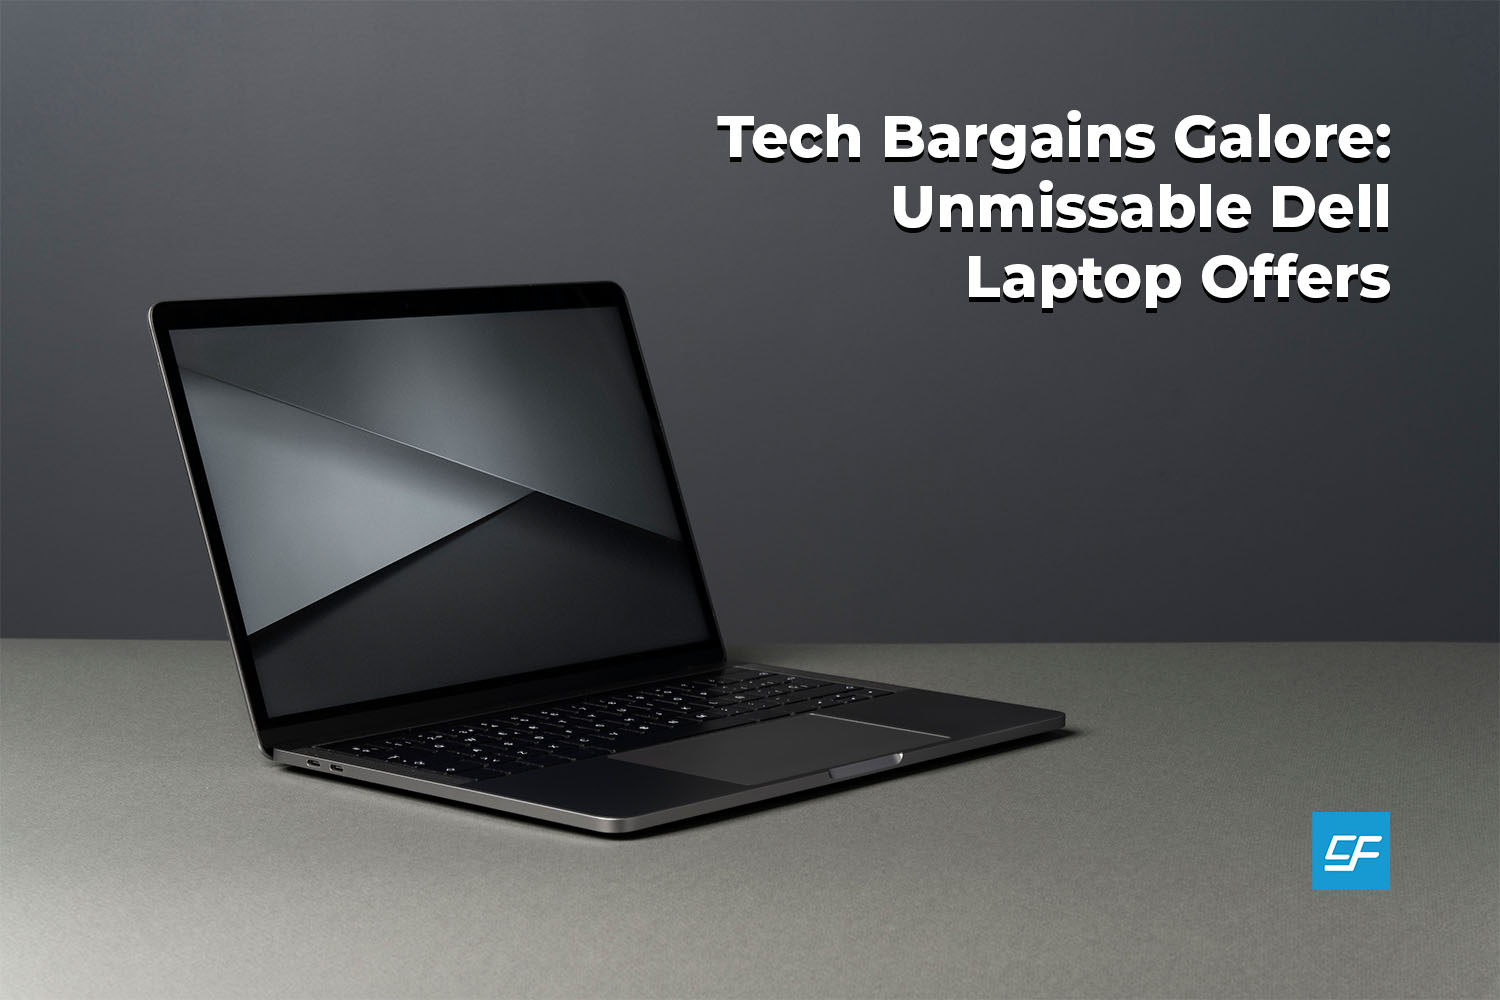 Laptop offers